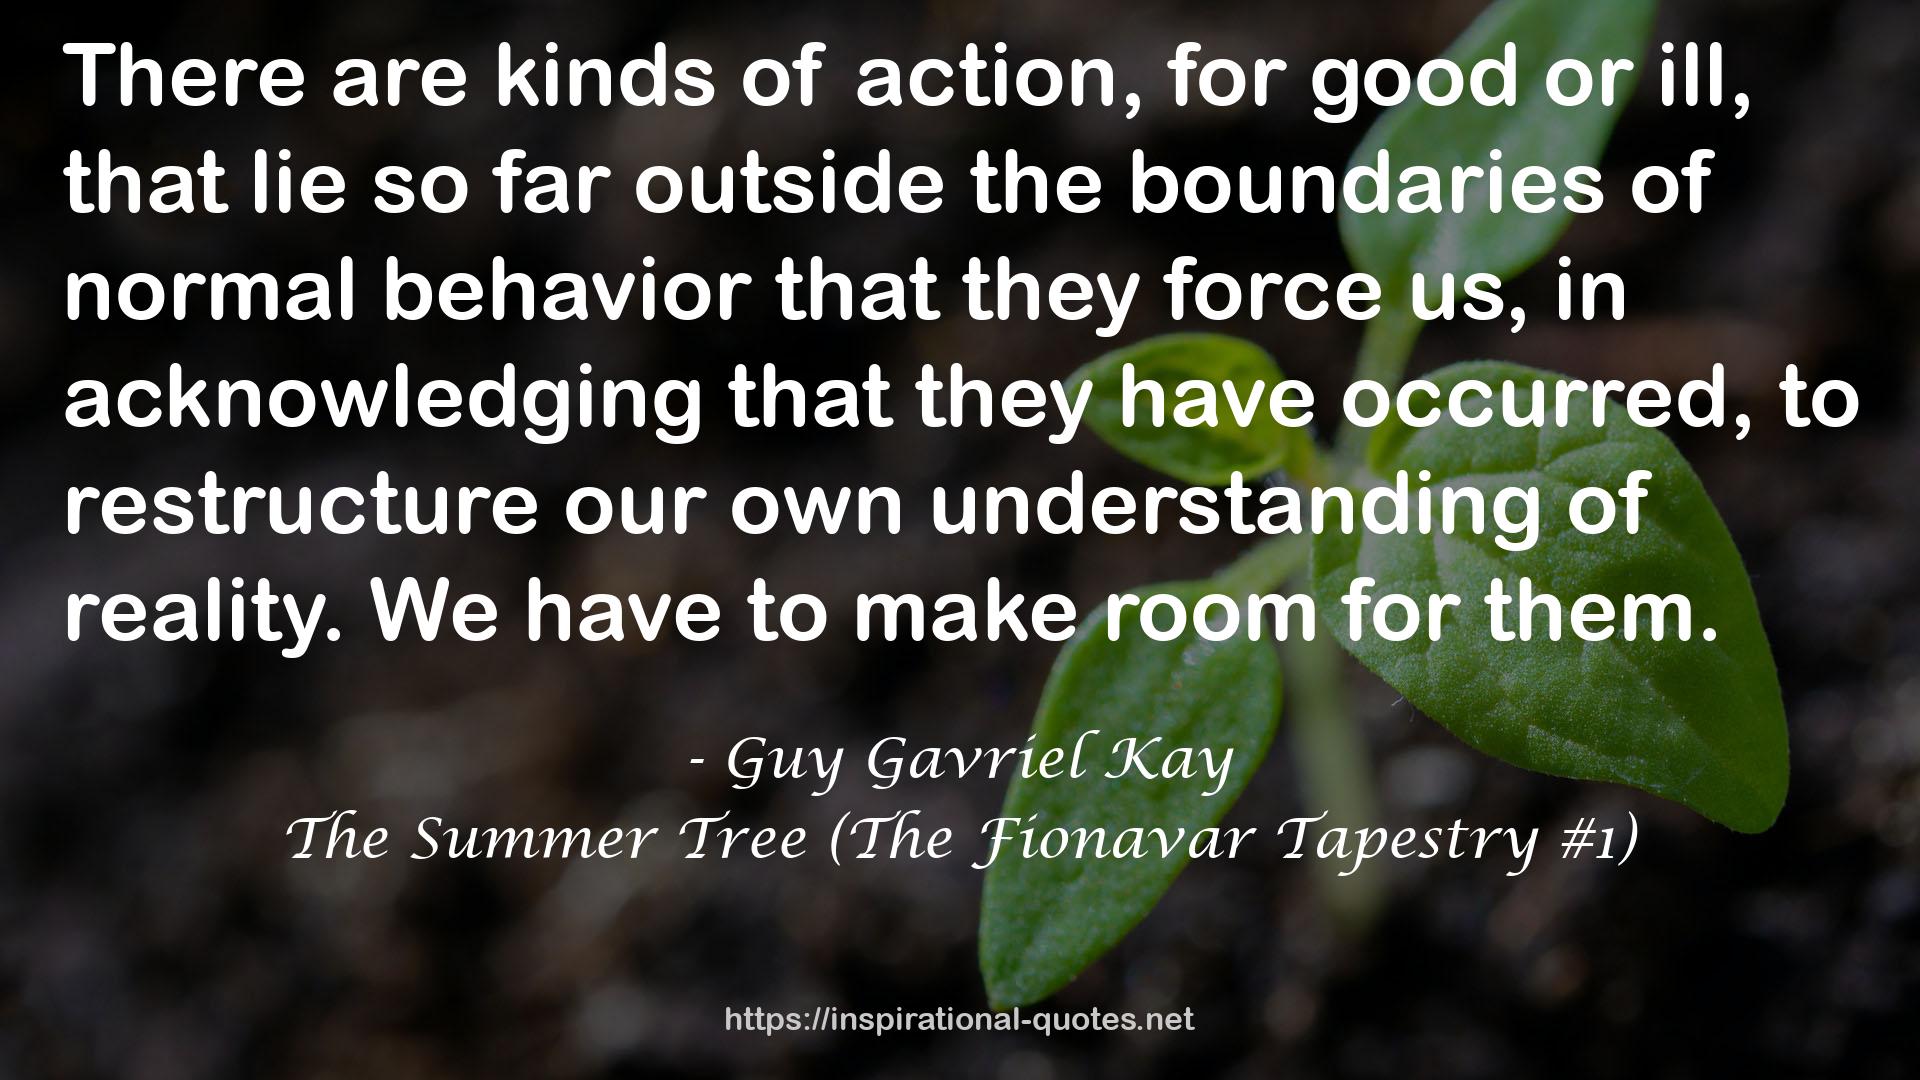 The Summer Tree (The Fionavar Tapestry #1) QUOTES